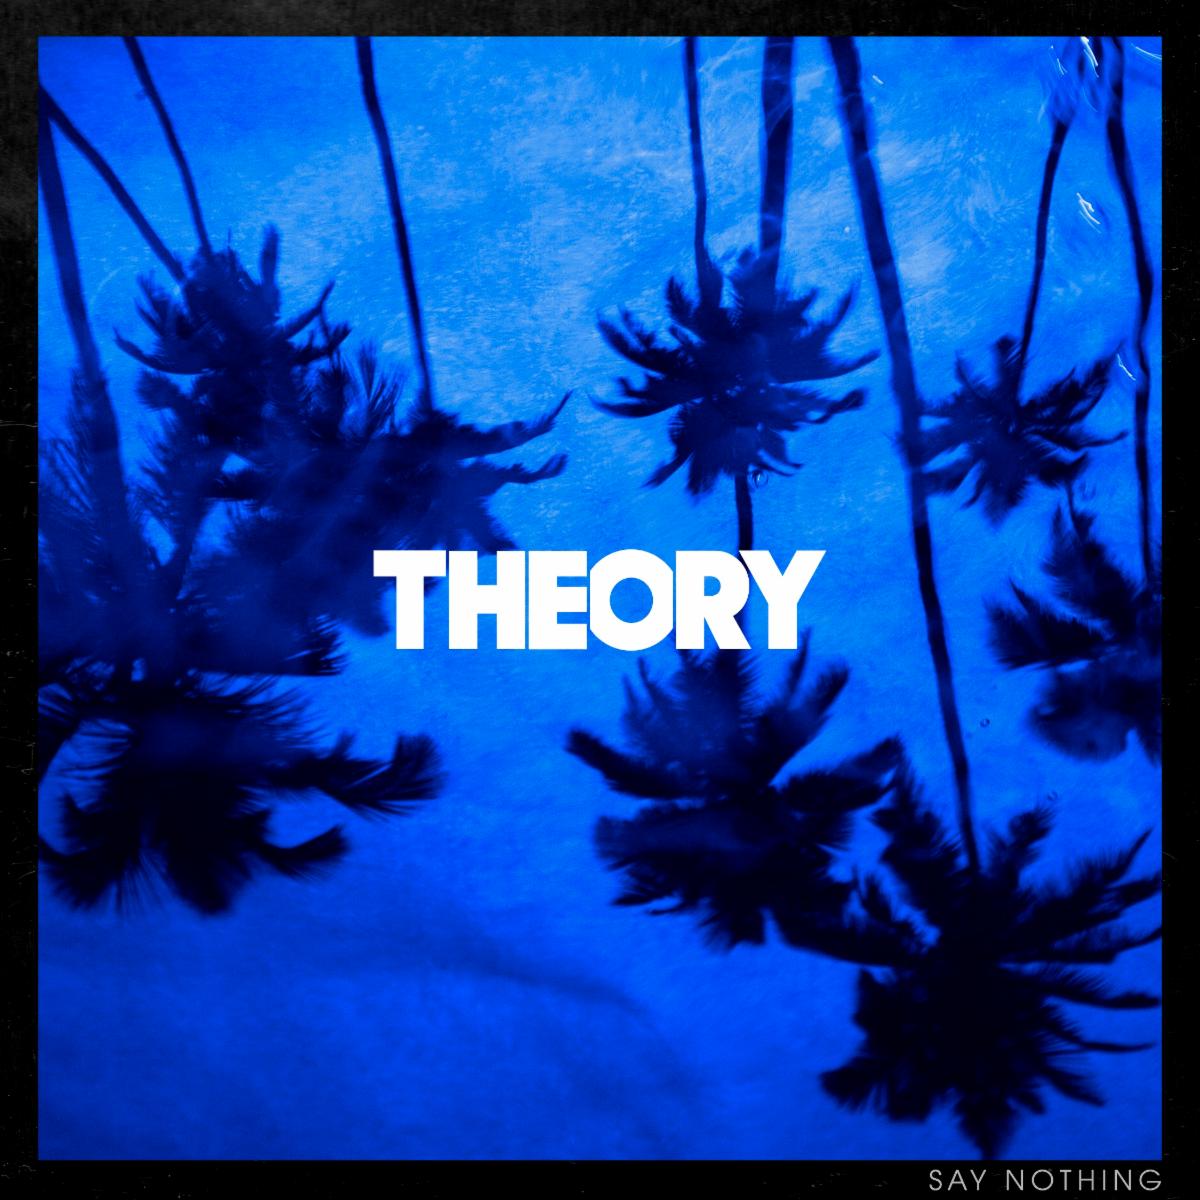 THEORY Releases New Single "Strangers" Addressing America's Political Divisiveness